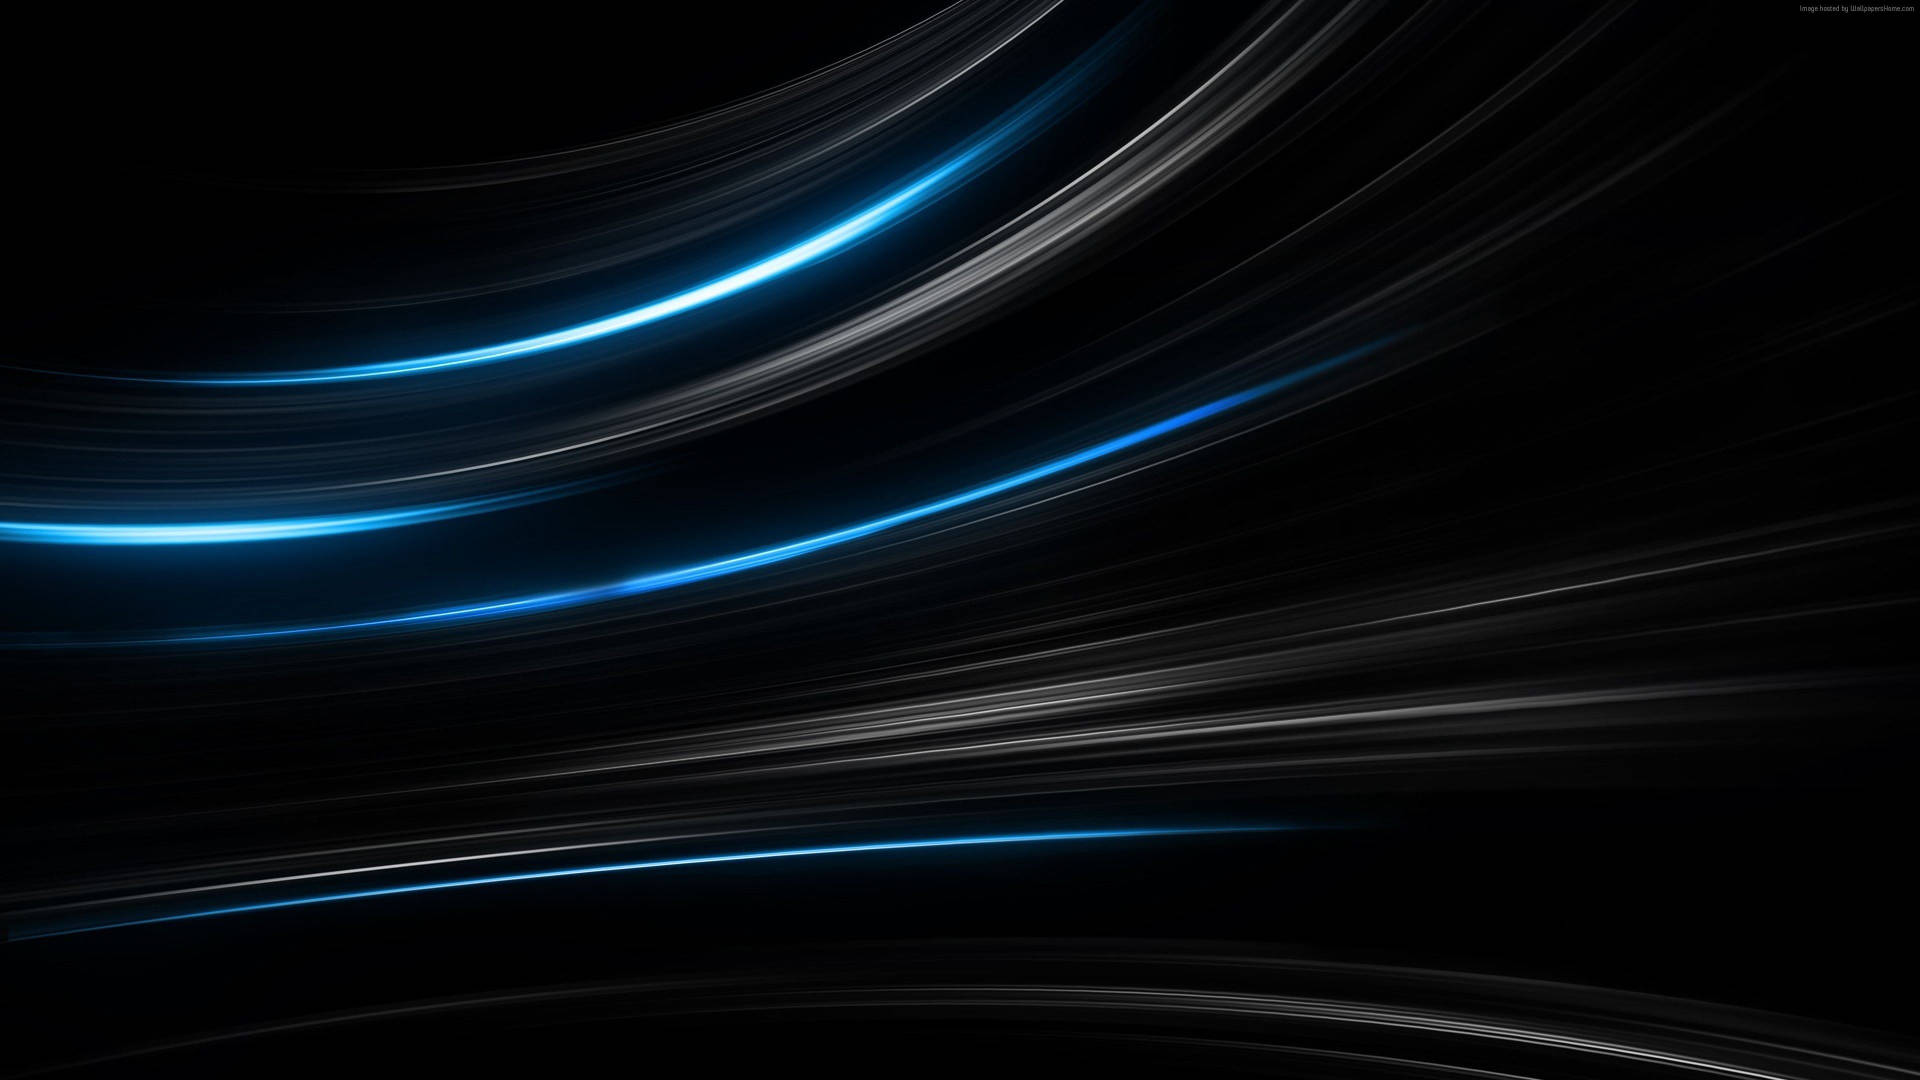 Black And Blue Curved Lines